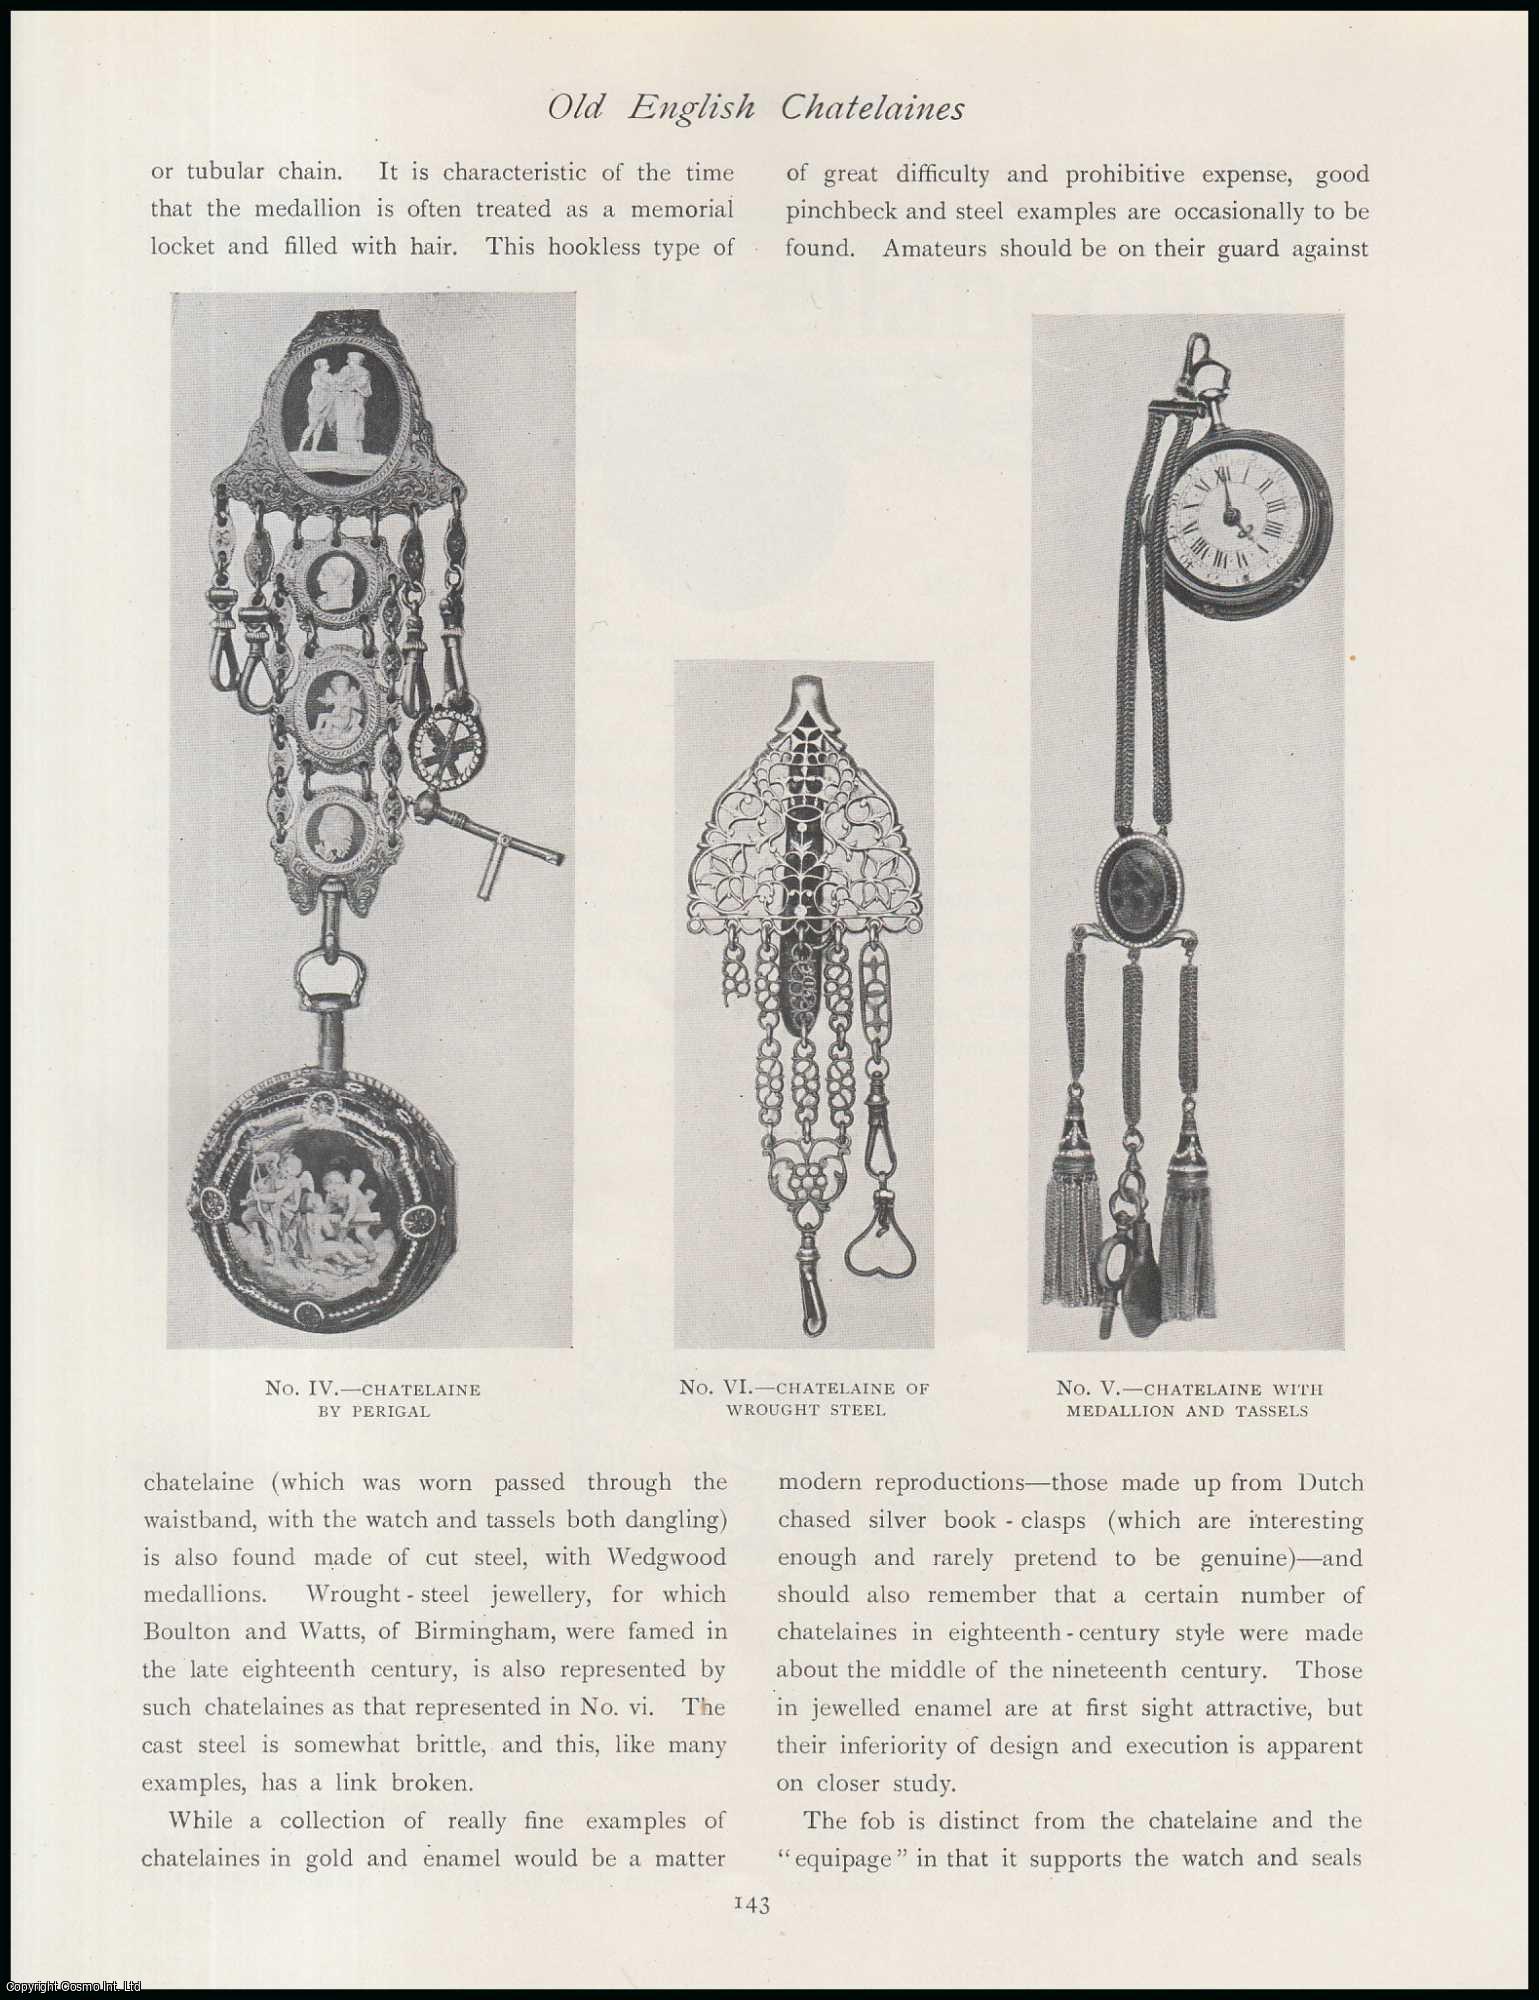 Joan Evans - Old English Chatelaines : Metal Hooks, which were attached to Tweezers, Tooth & Ear Picks, Keys, etc. An original article from The Connoisseur, 1915.